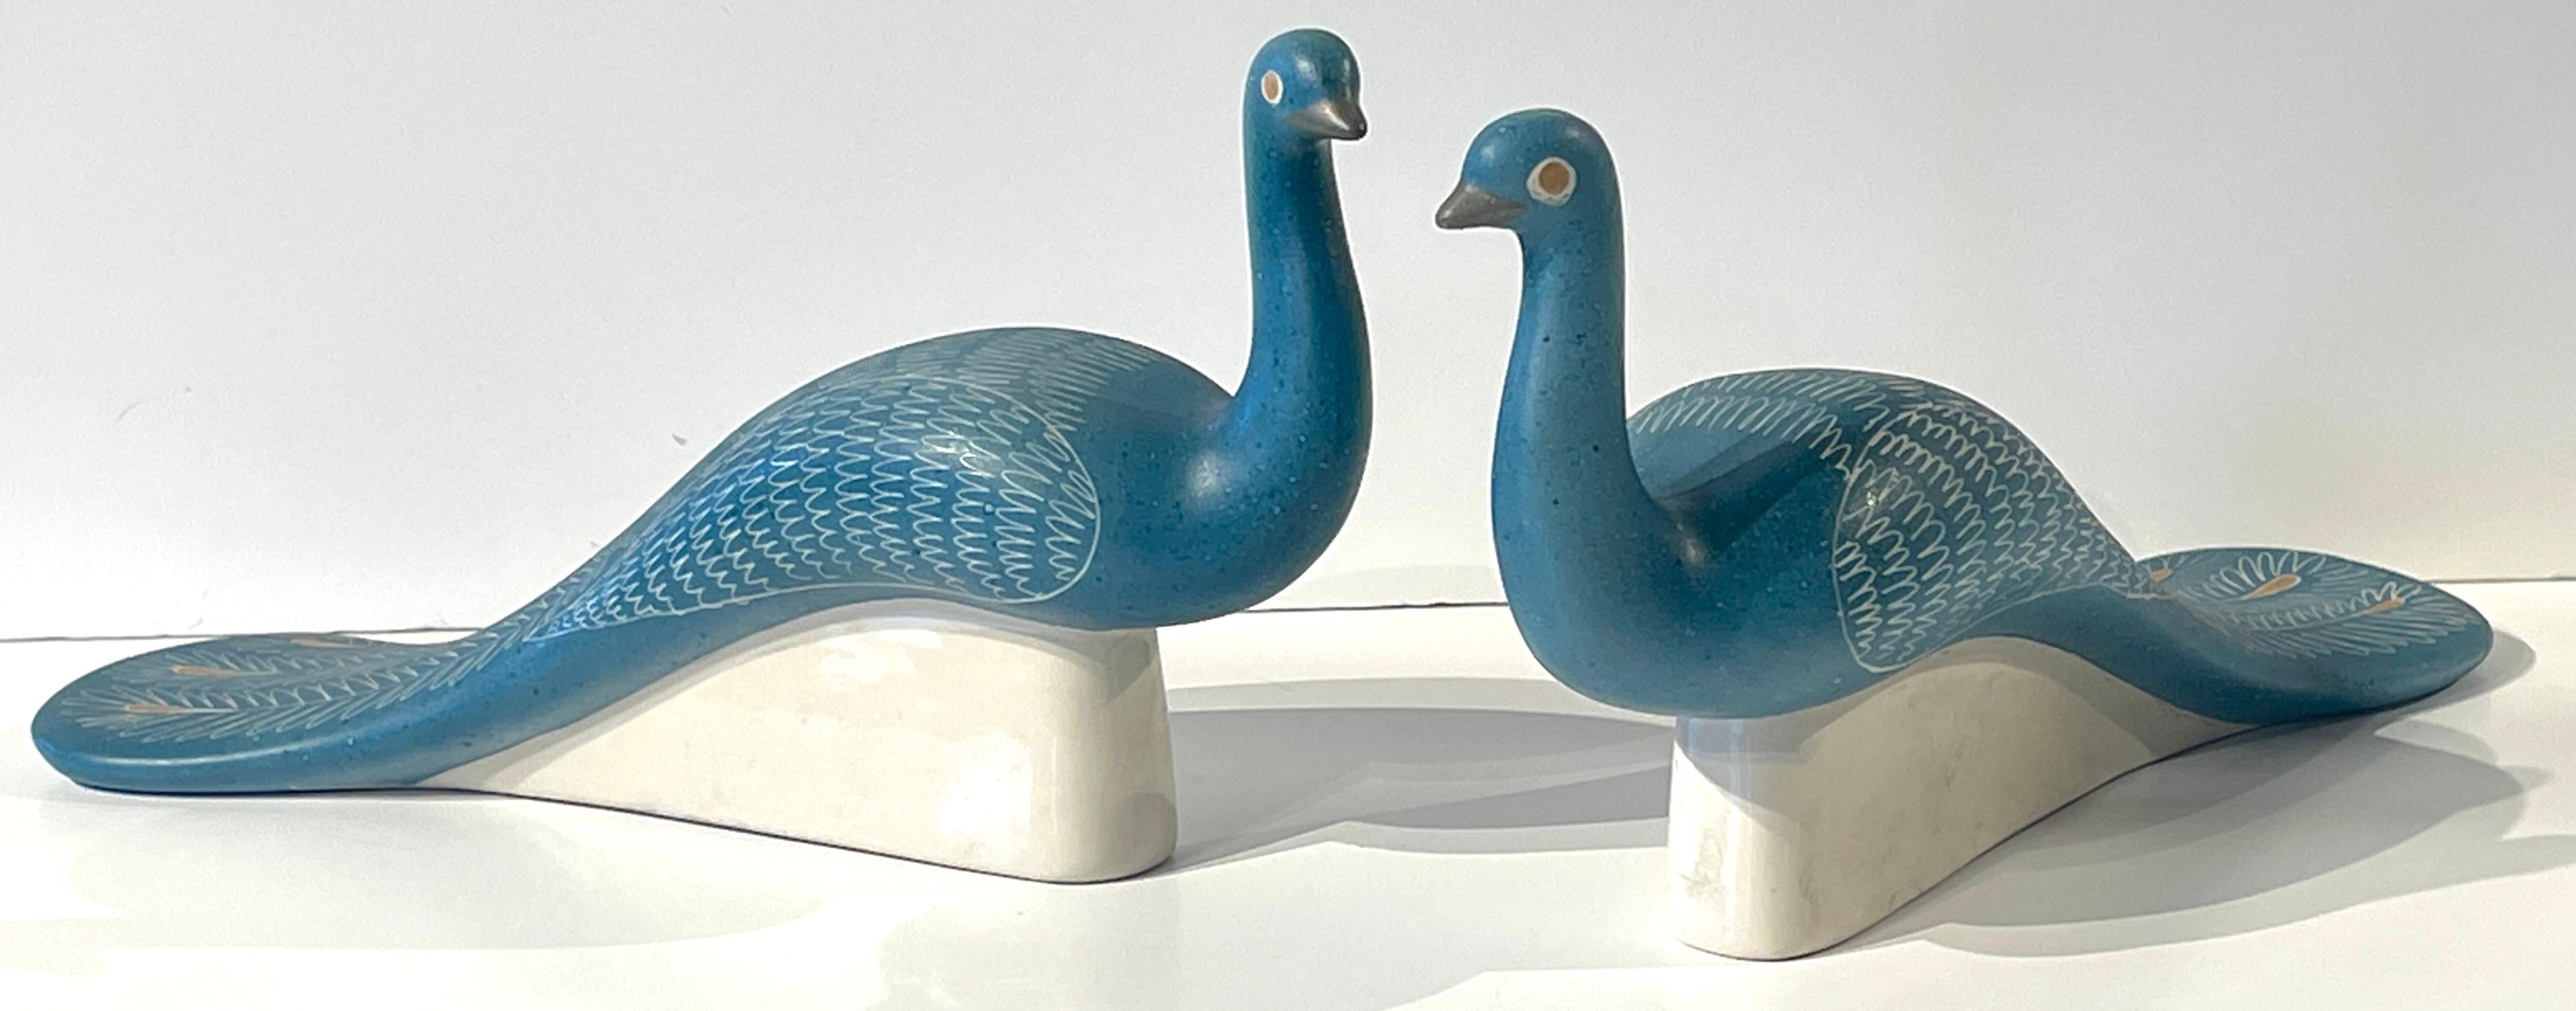 Pair of blue peacocks sculptures, by Waylande Gregory
USA, Circa 1950s
Each figure of large scale, perched on a plinth base, beautifully modeled and decorated, in blue enamel, with gilt highlights, feathers executed in sgrafitto, 
Both works are